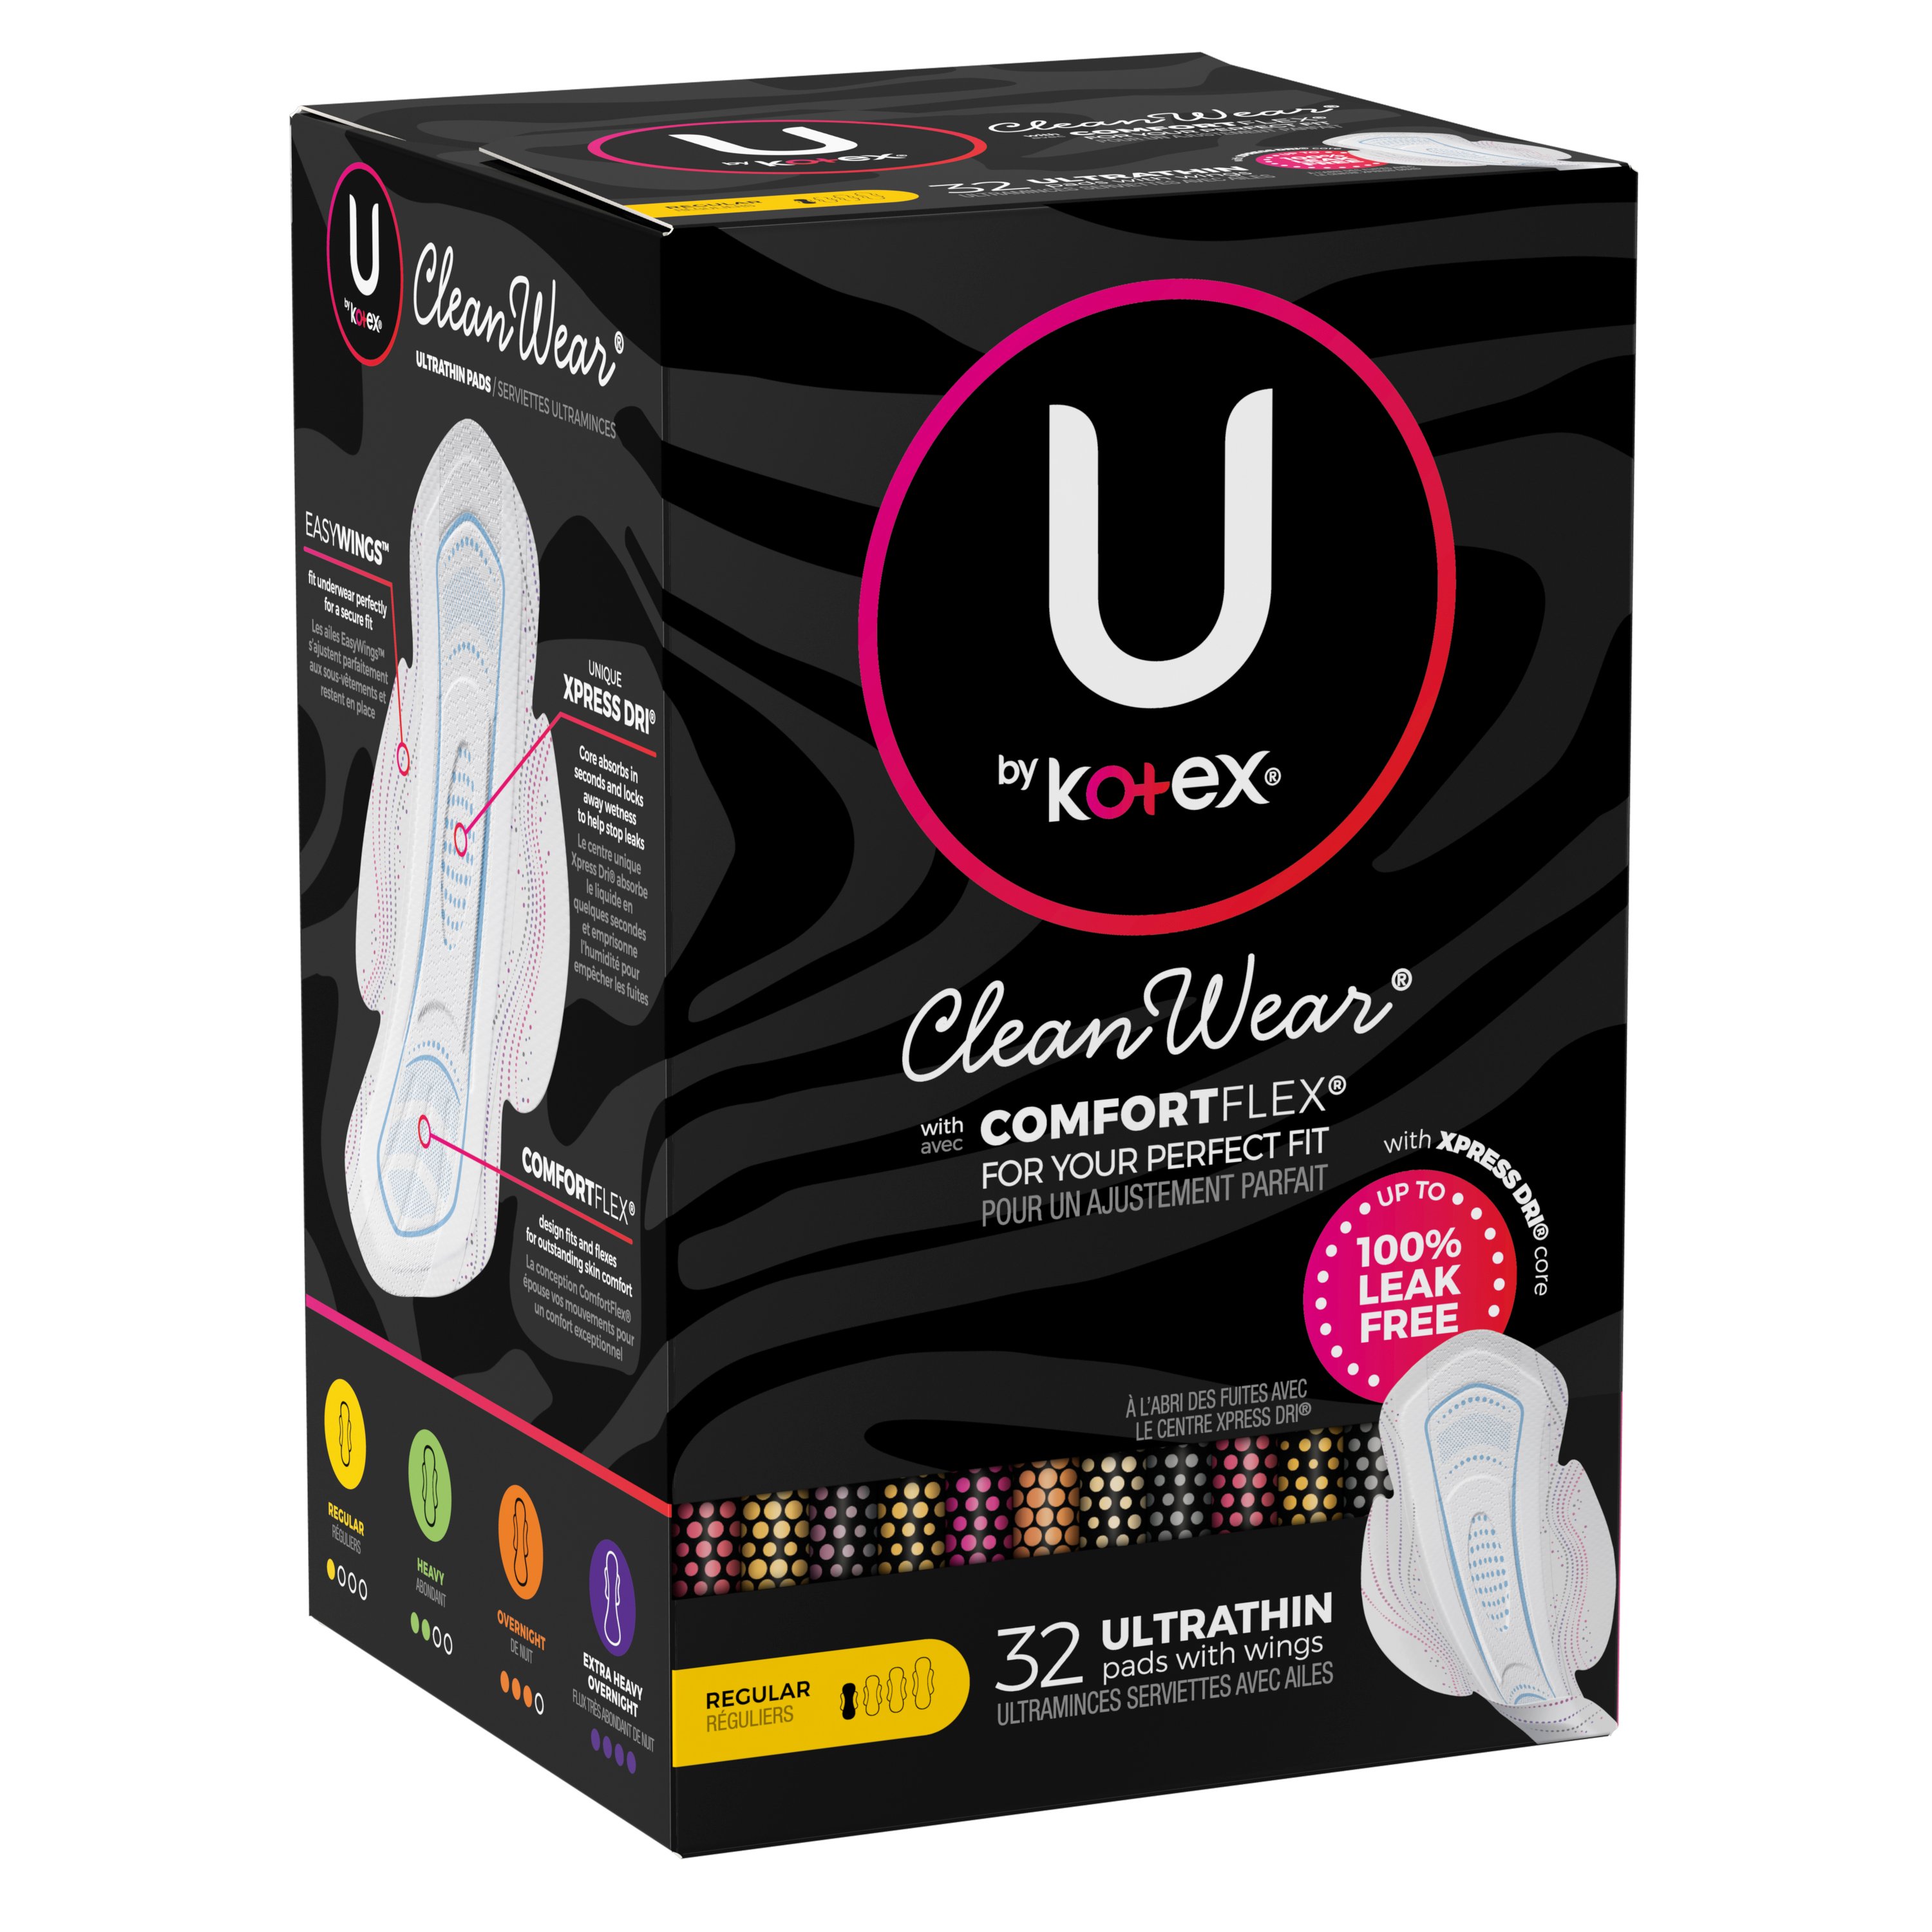 U by Kotex Clean & Secure Ultra Thin Pads with Wings - Regular